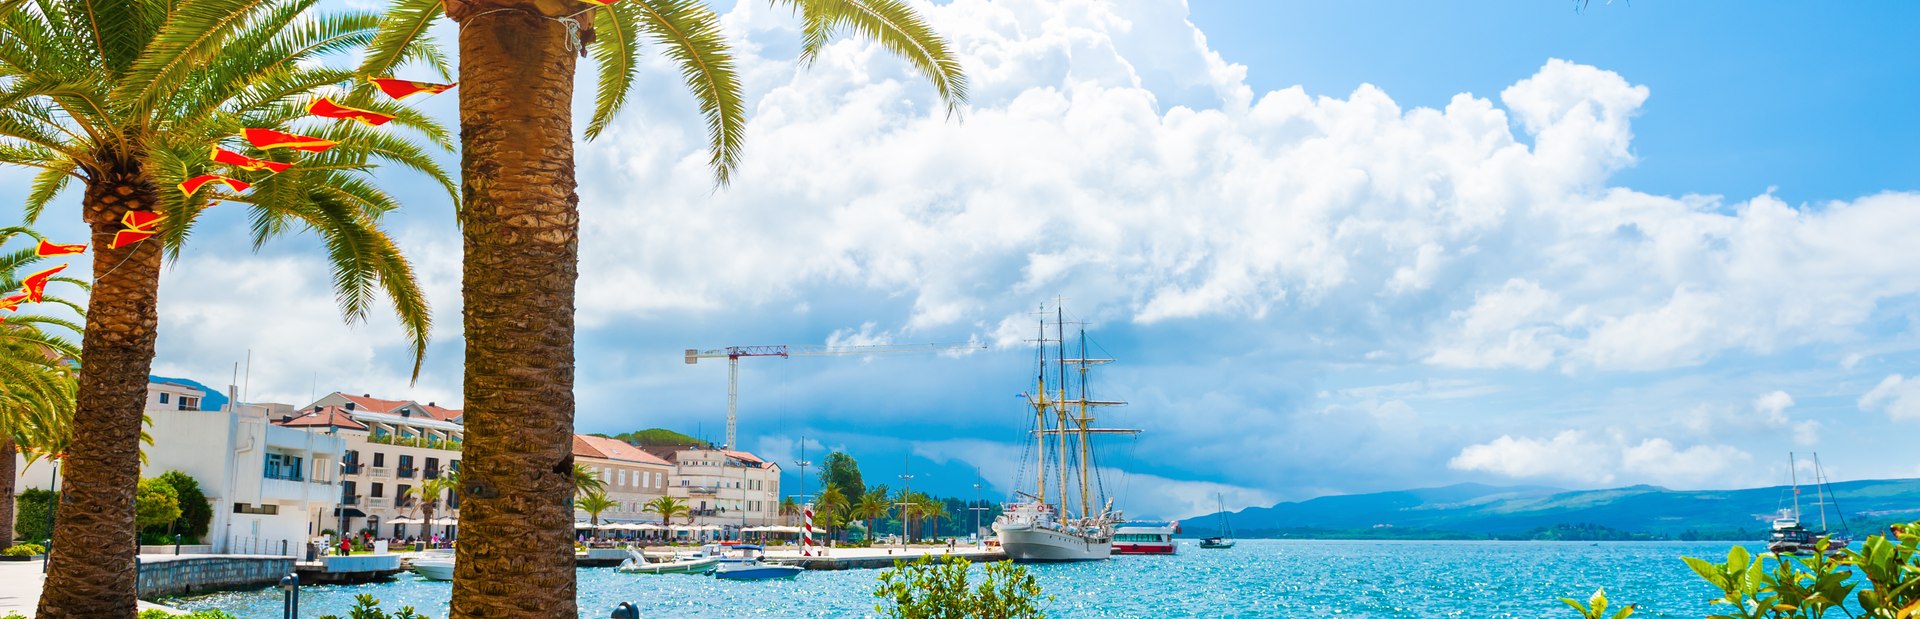 All you need to know about visiting Porto Montenegro by charter yacht